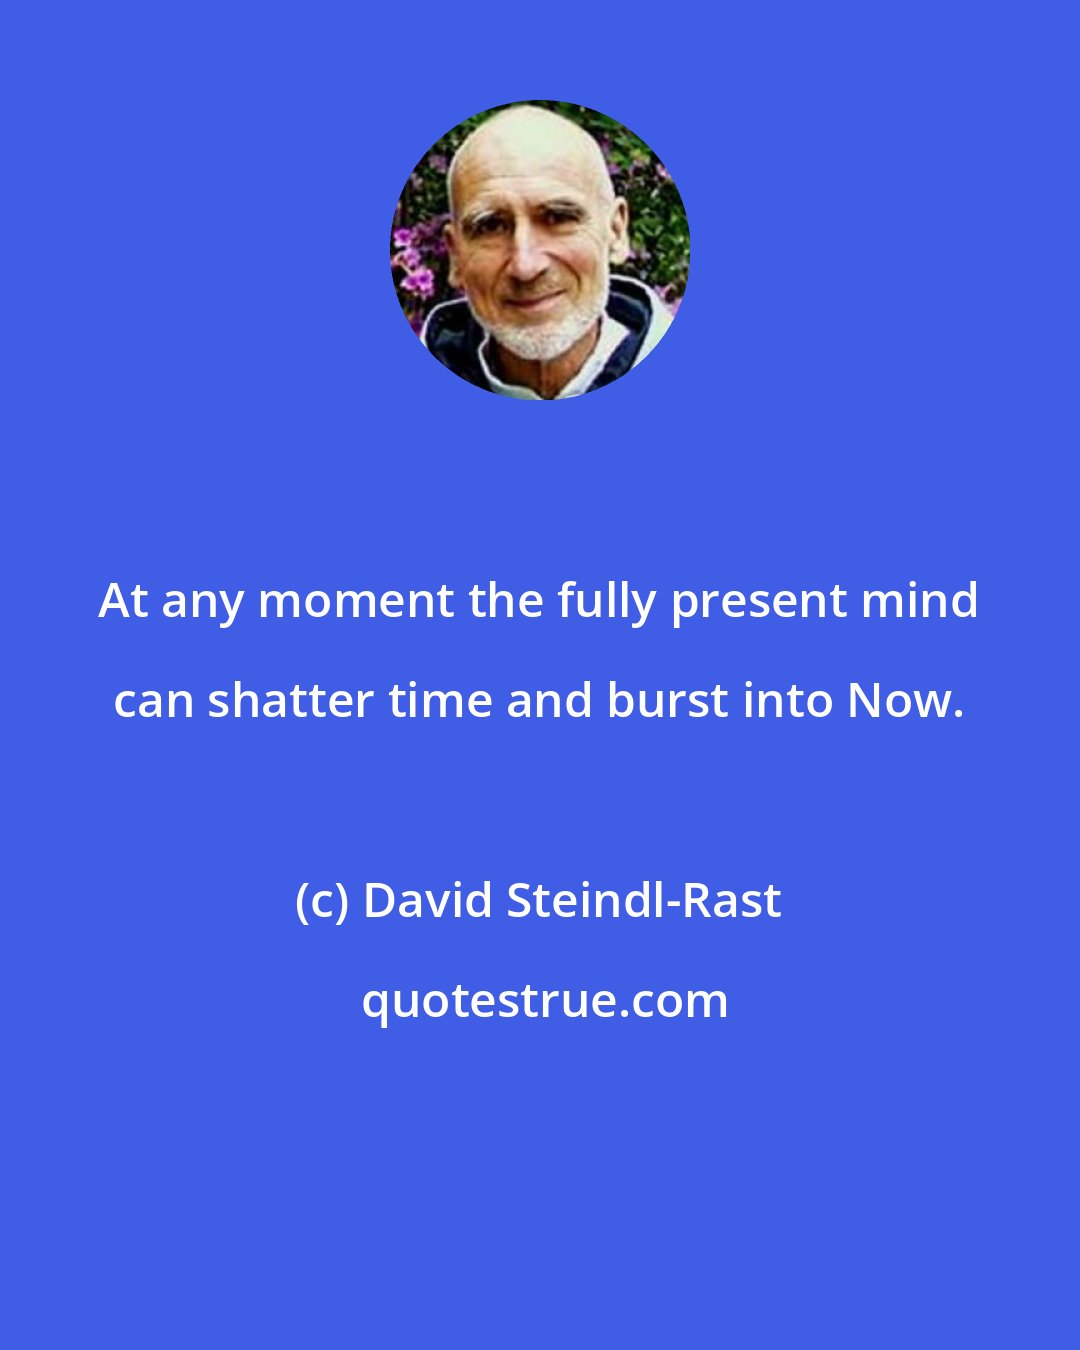 David Steindl-Rast: At any moment the fully present mind can shatter time and burst into Now.